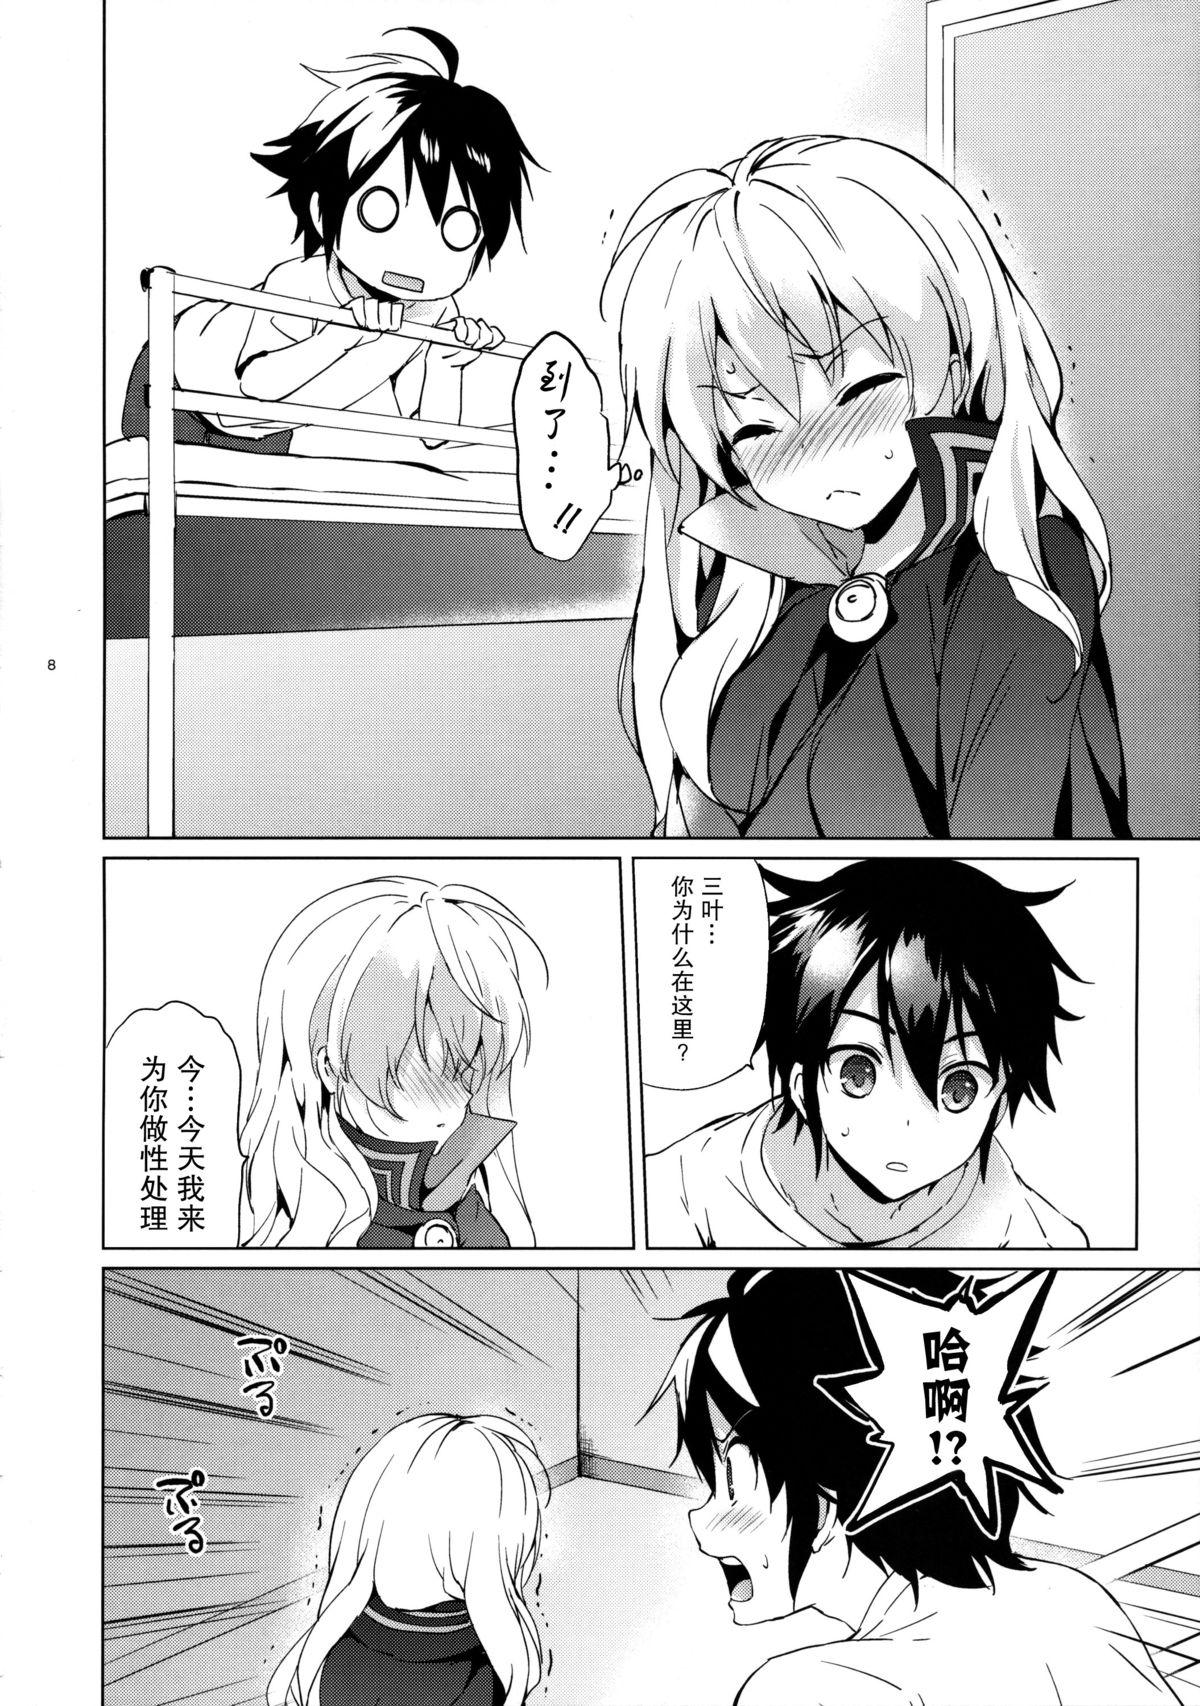 Curious Mitsuba Love Story - Seraph of the end Girl Fuck - Page 7